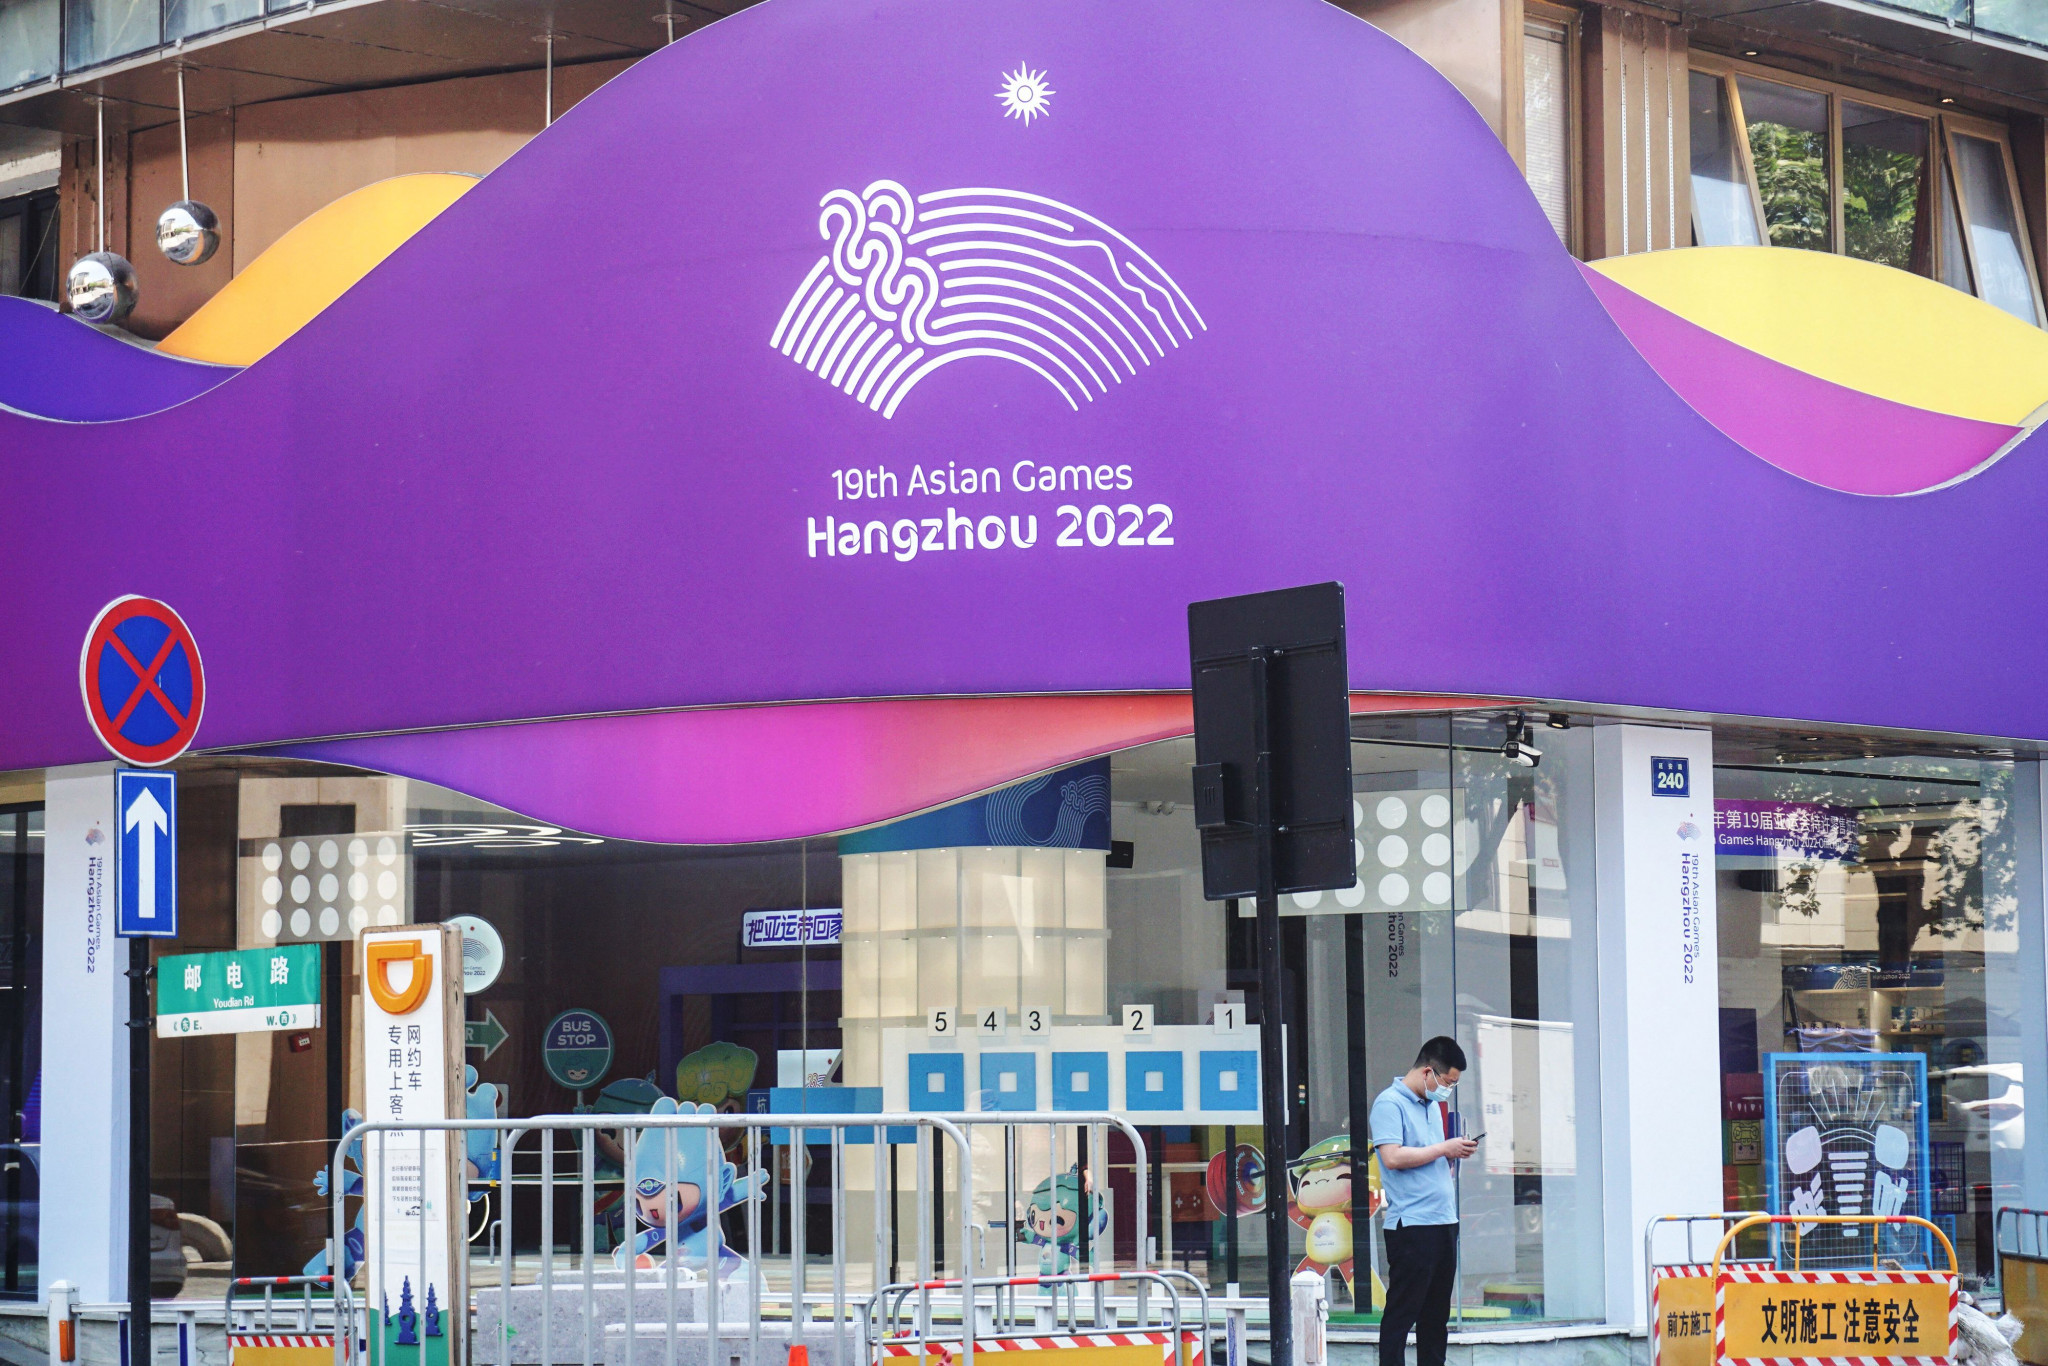 Hangzhou 2022 was postponed by a year due to the COVID-19 pandemic ©Getty Images